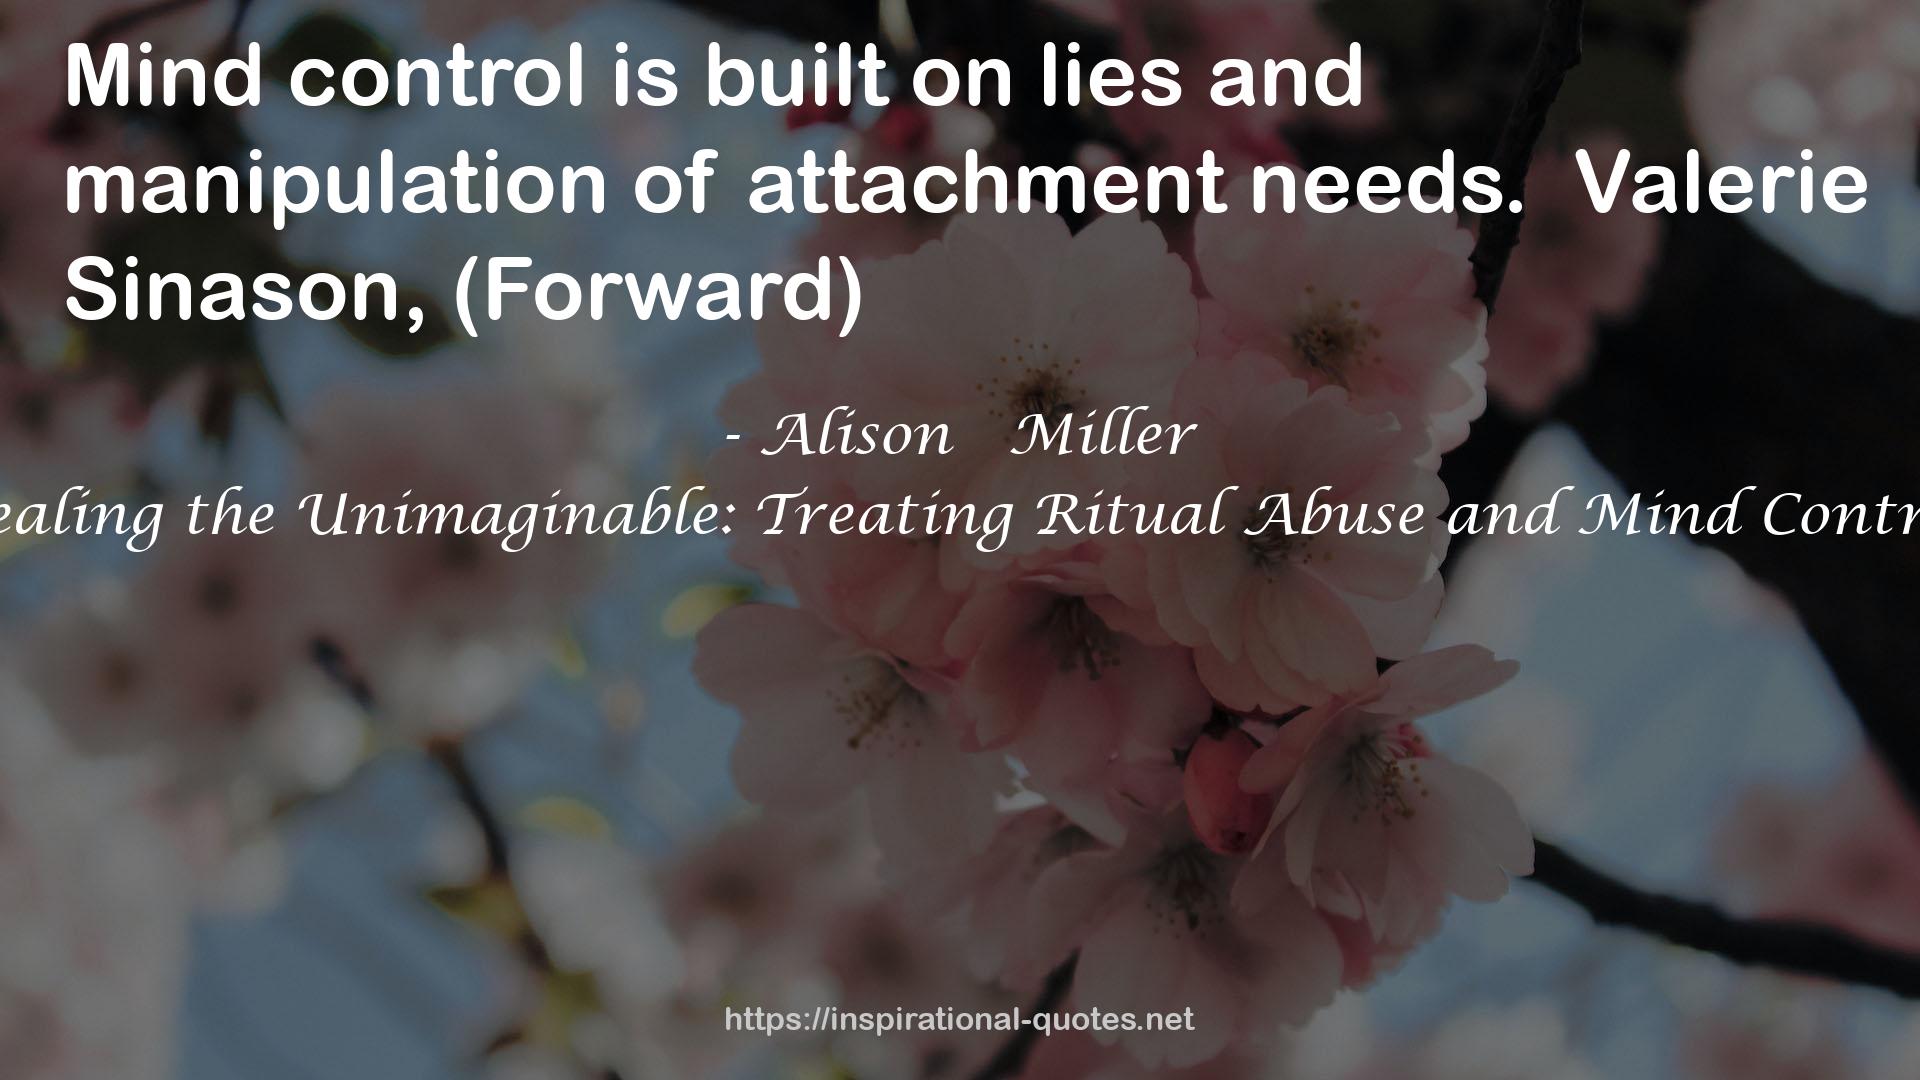 Healing the Unimaginable: Treating Ritual Abuse and Mind Control QUOTES